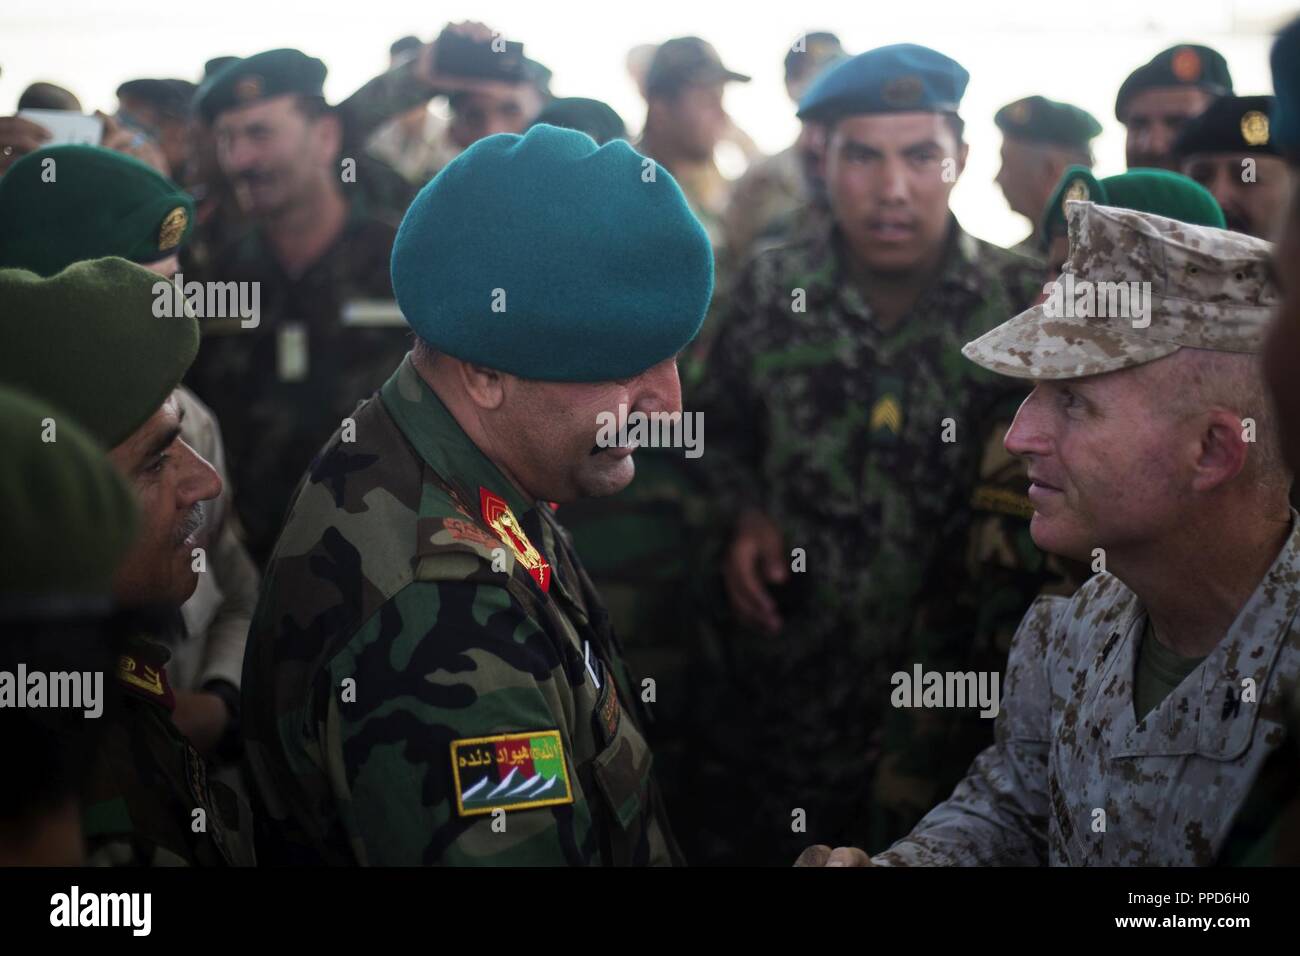 HELMAND PROVINCE, Afghanistan (August 30, 2018) - Afghan Maj. Gen. Wali Mohammad Ahmadzai, former commanding general of the Afghan National Army (ANA) 215th Corps, says goodbye to U.S. Marine Corps Col. Edward J. Headley, Task Force-Southwest’s senior advisor to the ANA 215th Corps prior to boarding a flight. Ahmadzai relinquished command of the ANA 215th Corps to Afghan Brig. Gen. Abdul Hadi Tarin and assumed command of the 209th “Shaheen” Corps. Stock Photo